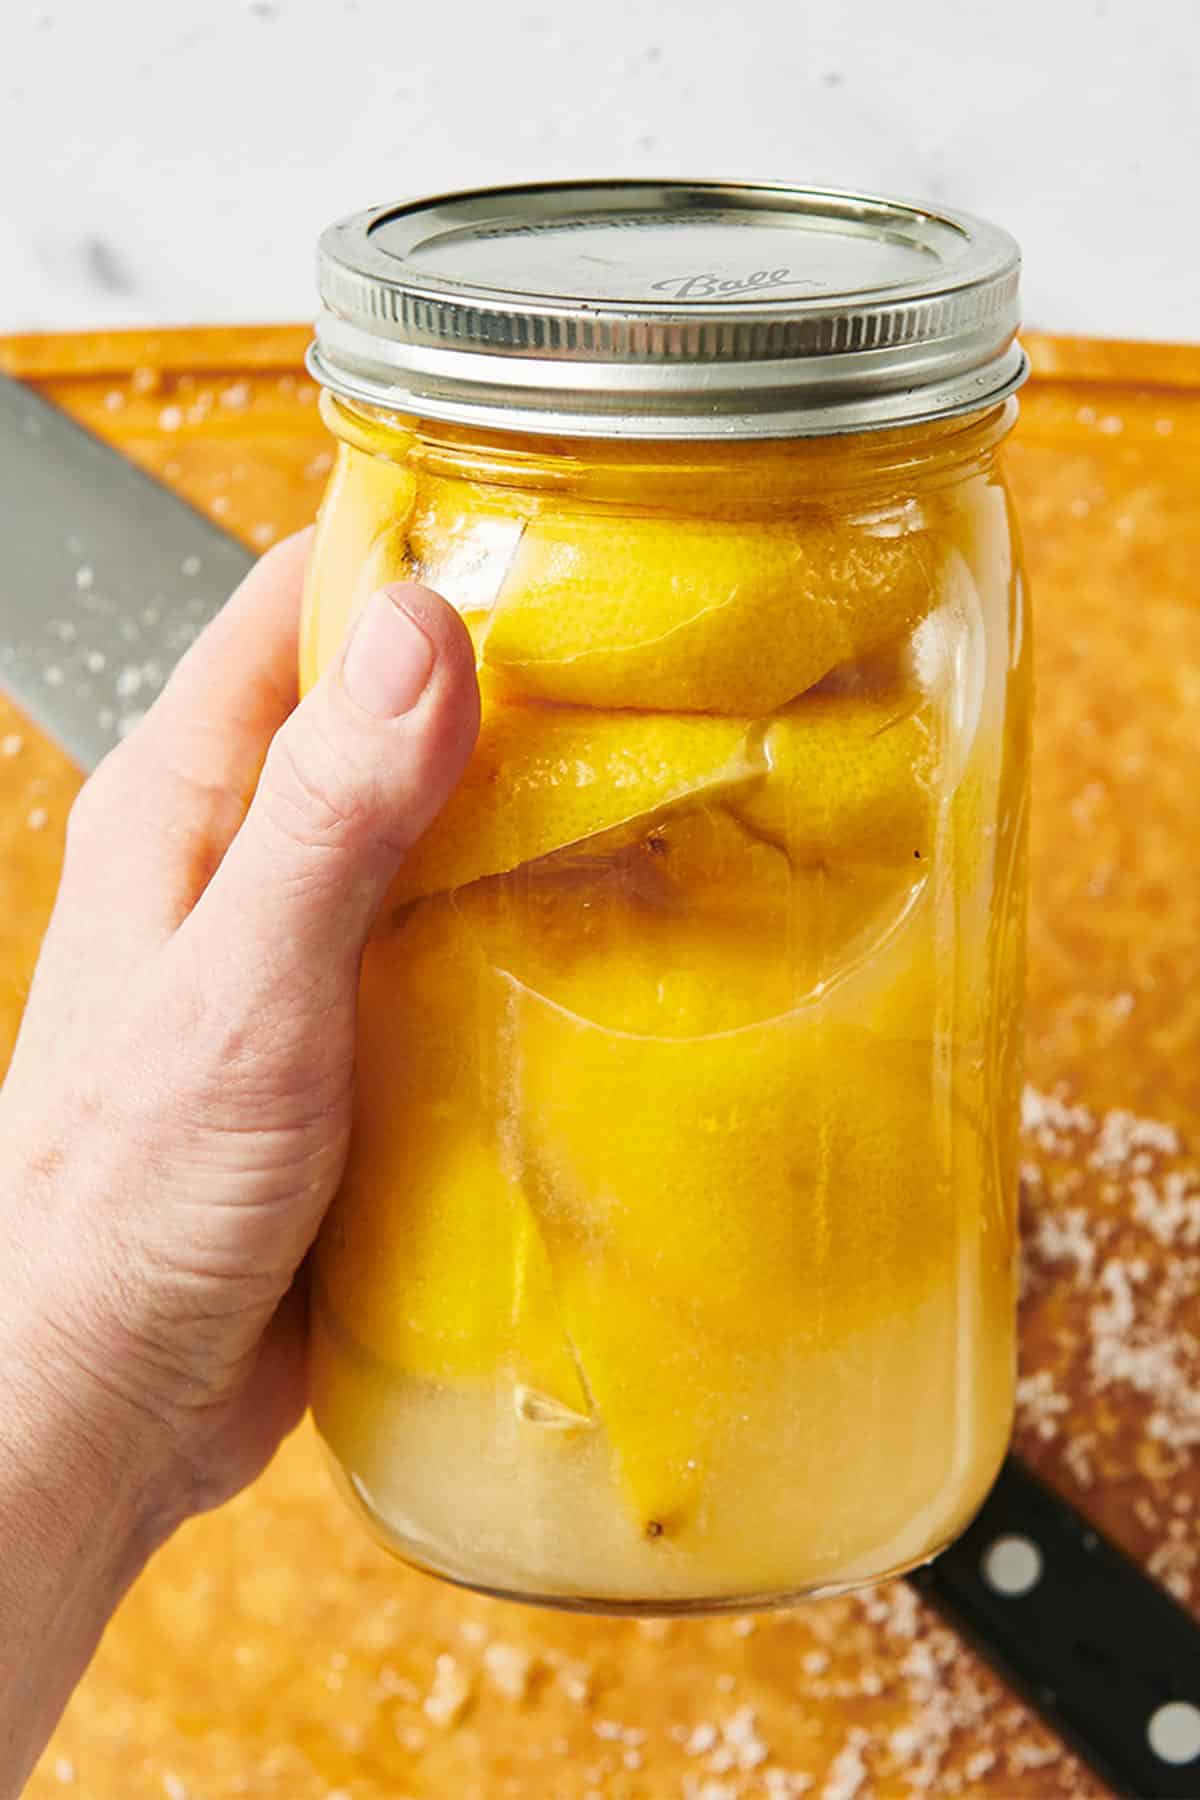 Woman holding jar of preserved lemons over wood cutting board.